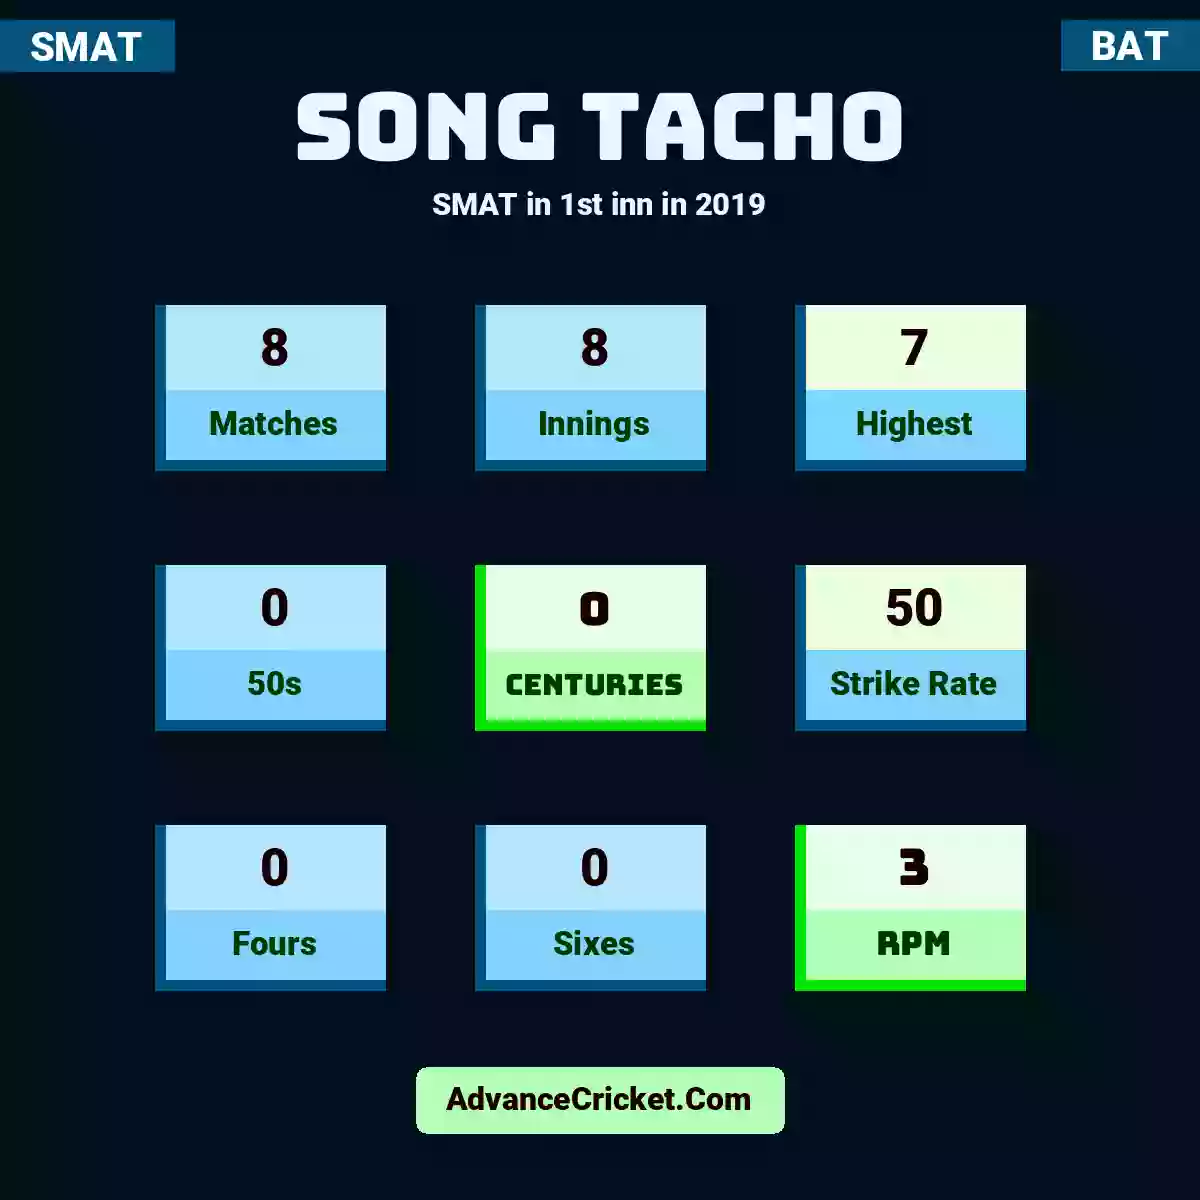 Song Tacho SMAT  in 1st inn in 2019, Song Tacho played 8 matches, scored 7 runs as highest, 0 half-centuries, and 0 centuries, with a strike rate of 50. S.Tacho hit 0 fours and 0 sixes, with an RPM of 3.